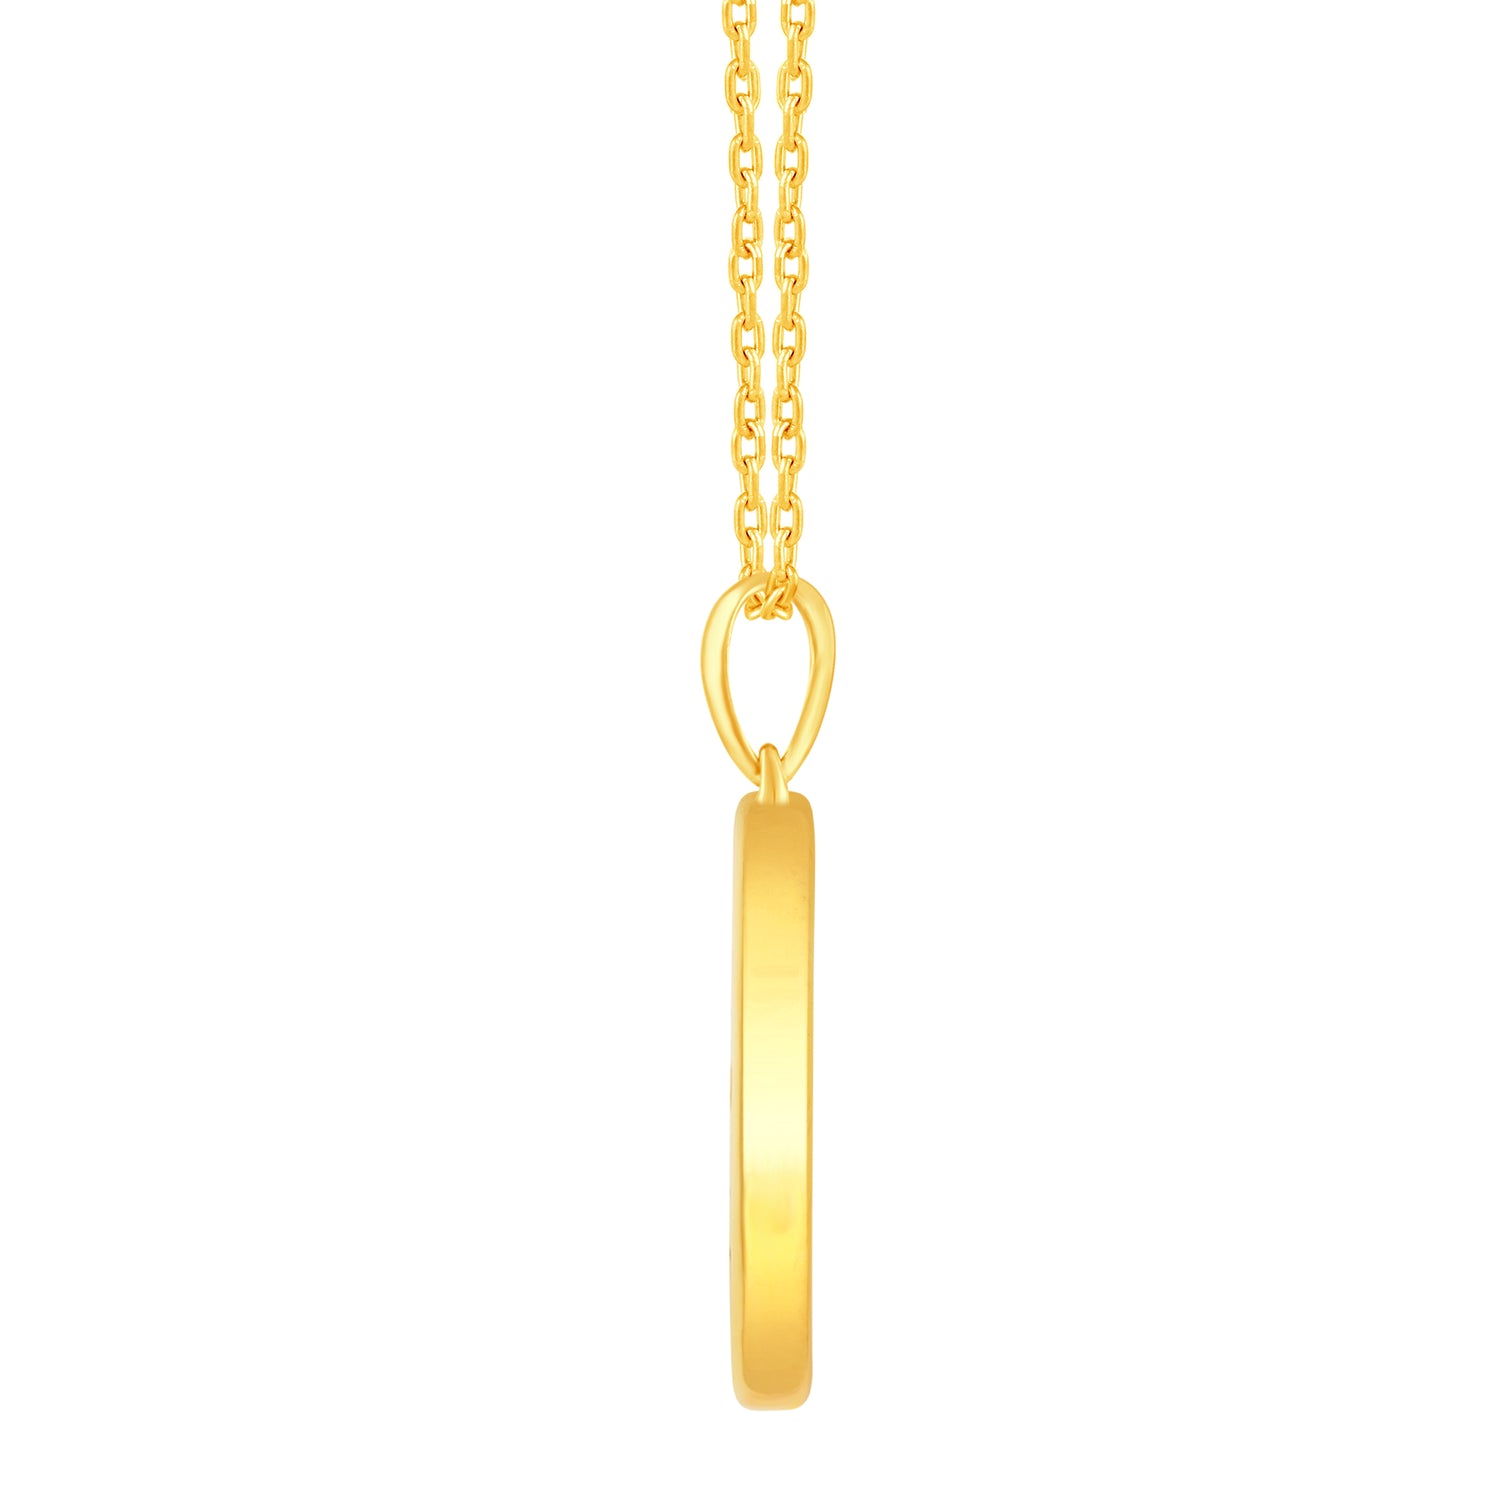 1/20 Cttw Diamond Aquarius Zodiac Pendant Necklace set in 925 Sterling Silver 14K Yellow Gold Plating